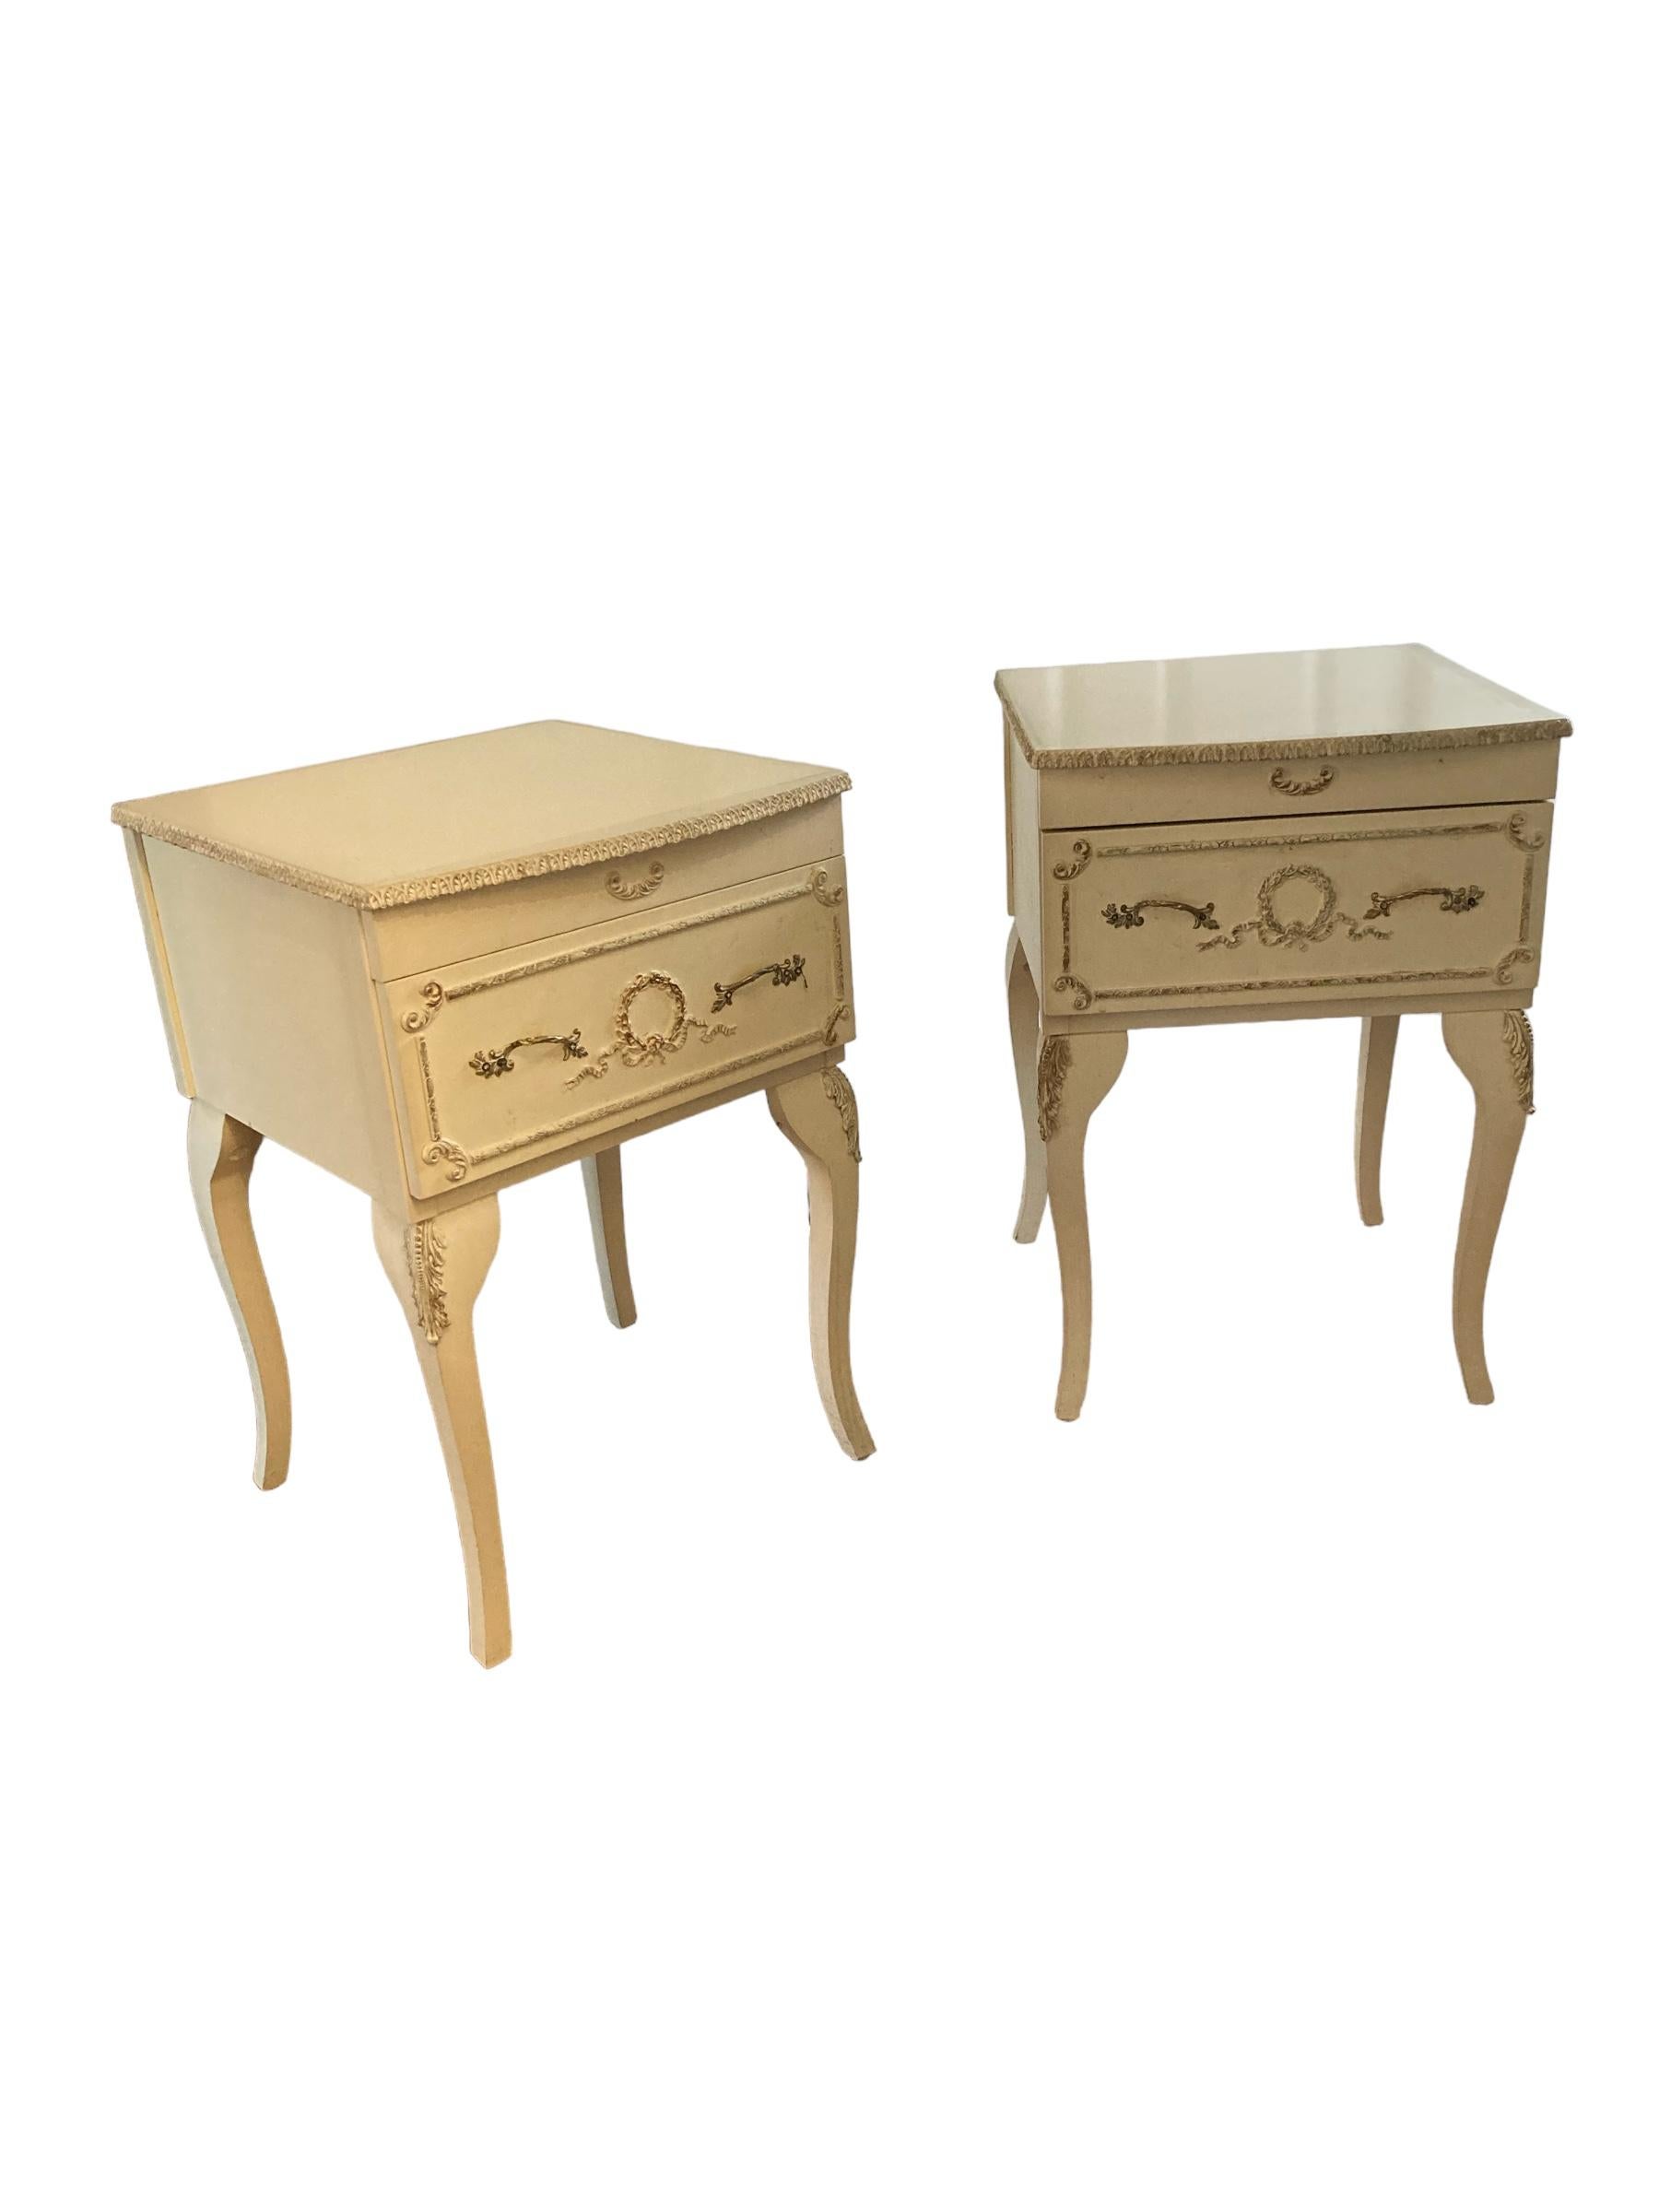 Vintage Pair of Bedside tables or Nightstands French Antique Style, cream finish with brass handles. This set of two bedside cabinets have a signgle drawer with two ornate handles and cabriole style legs  will suit any style of interior